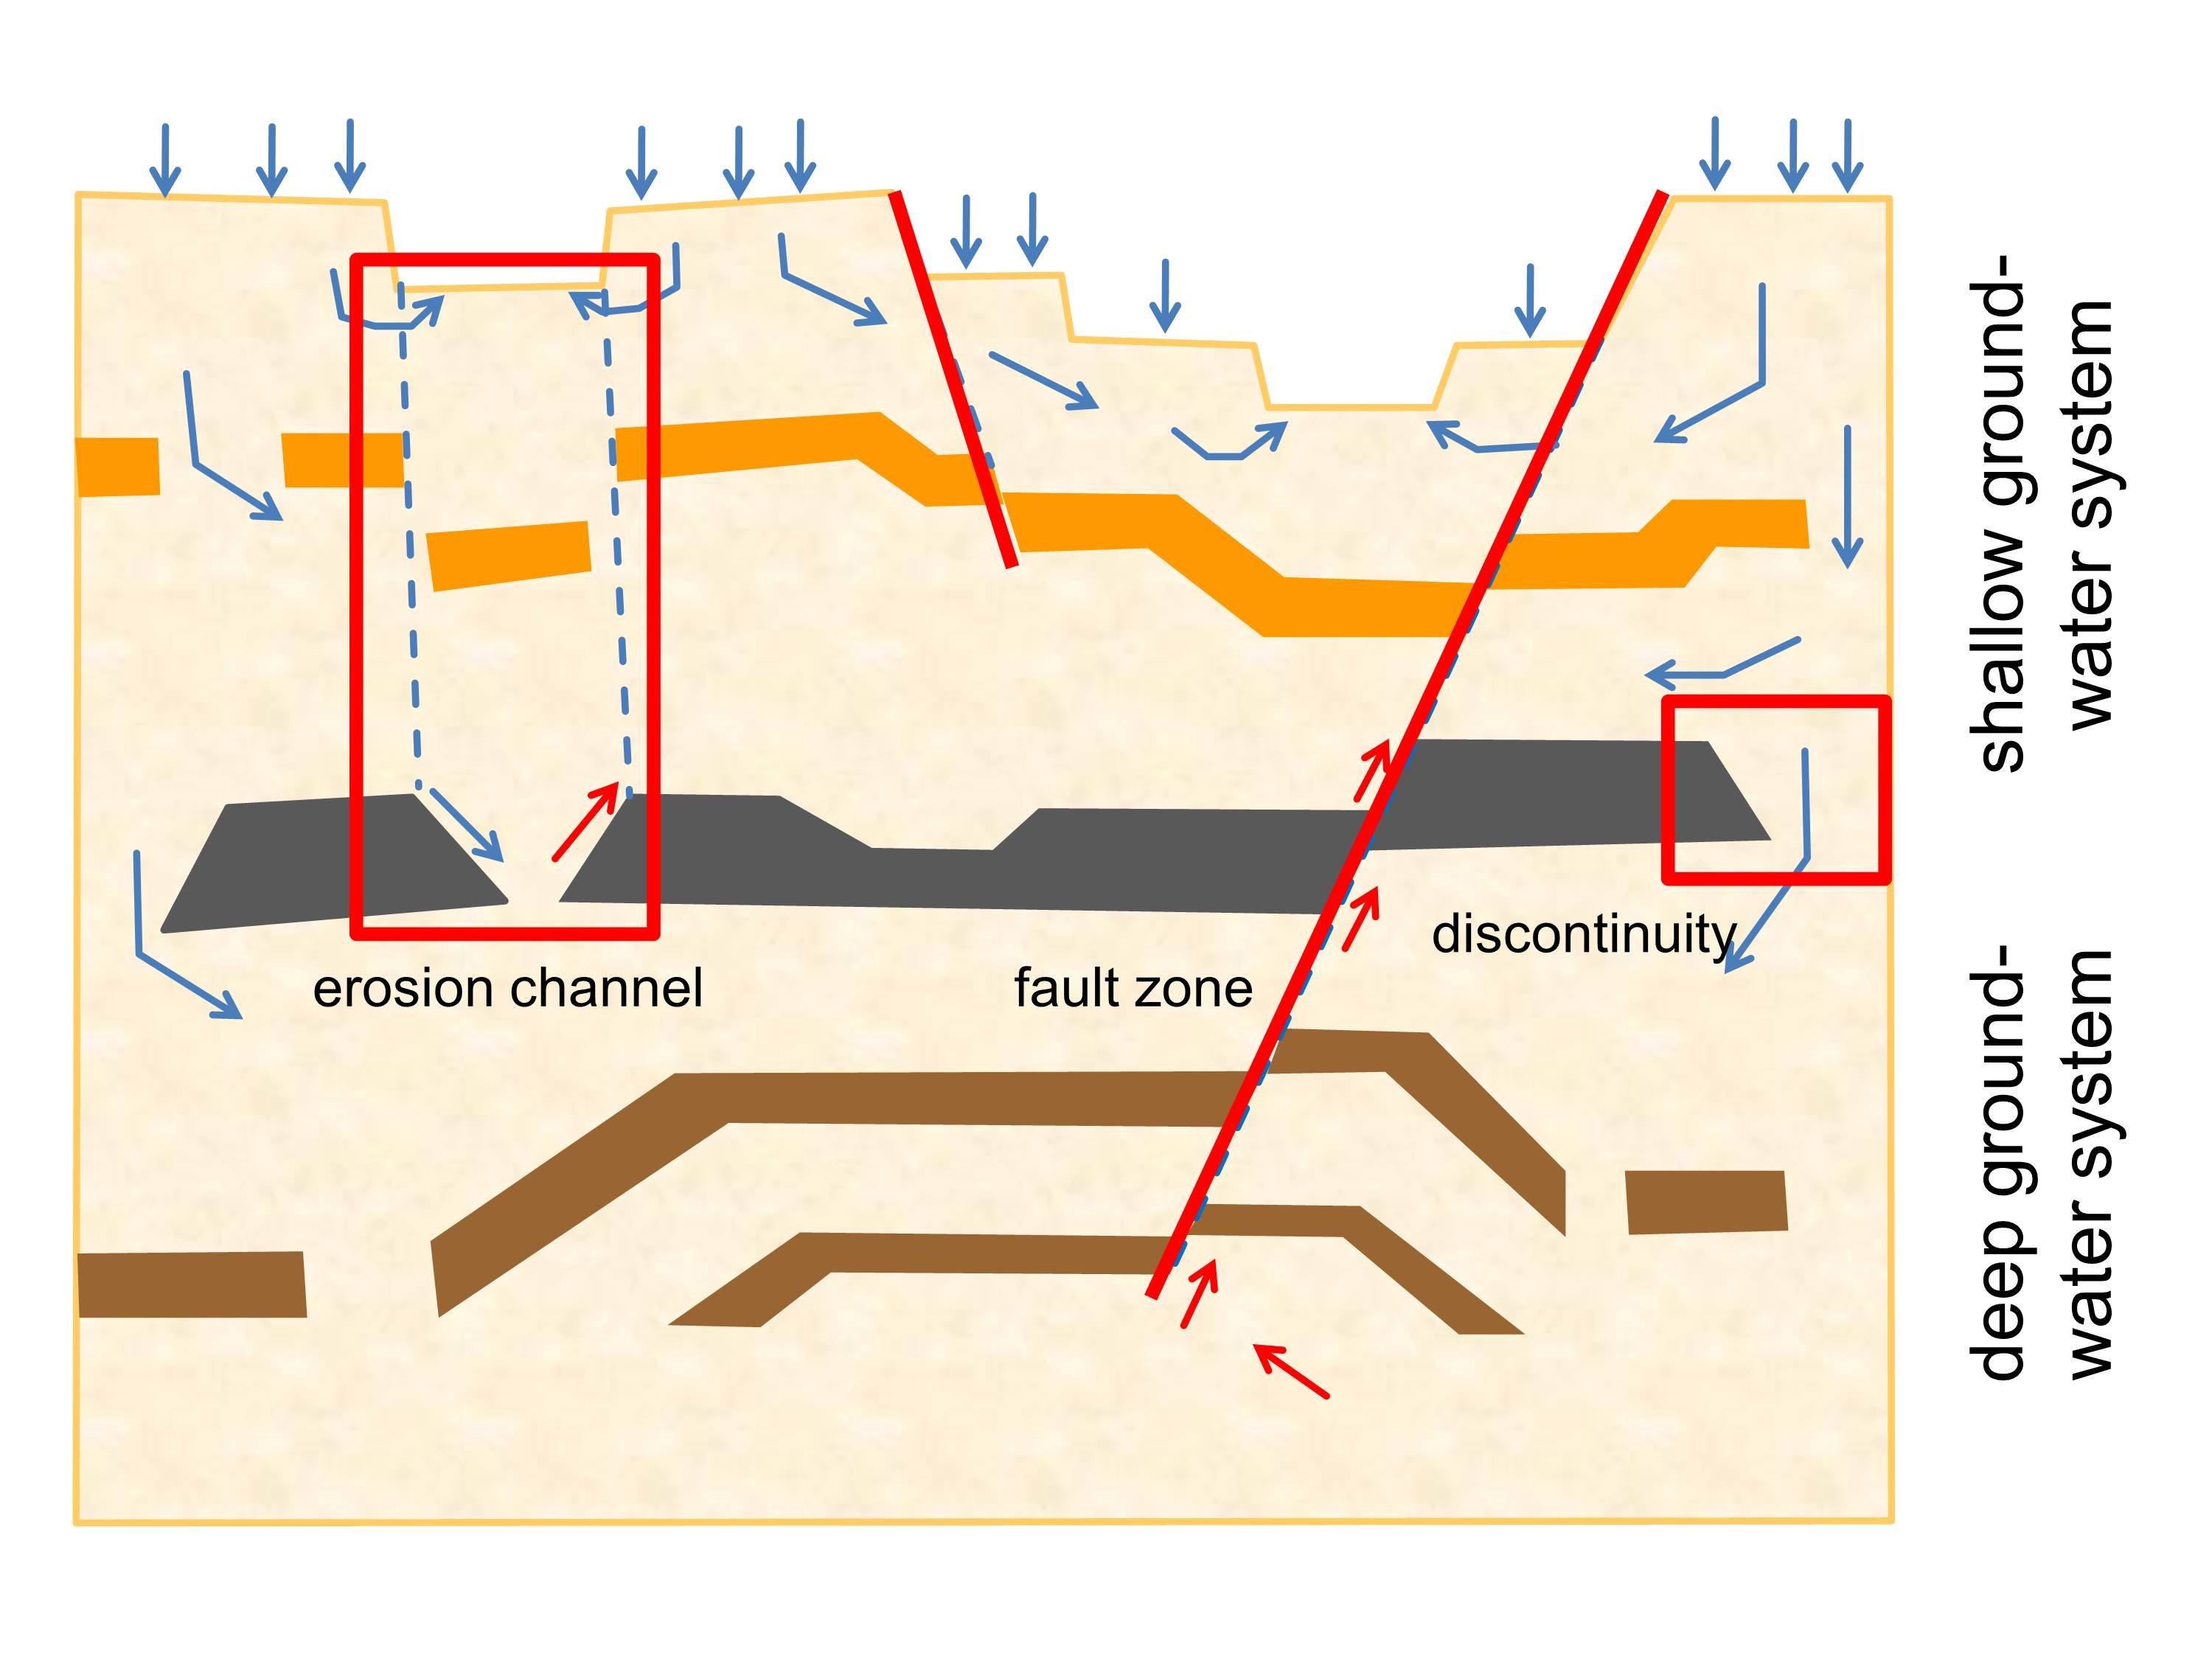 Schematic diagram showing the different groundwater systems and potential for fluid flow in the subsurface.